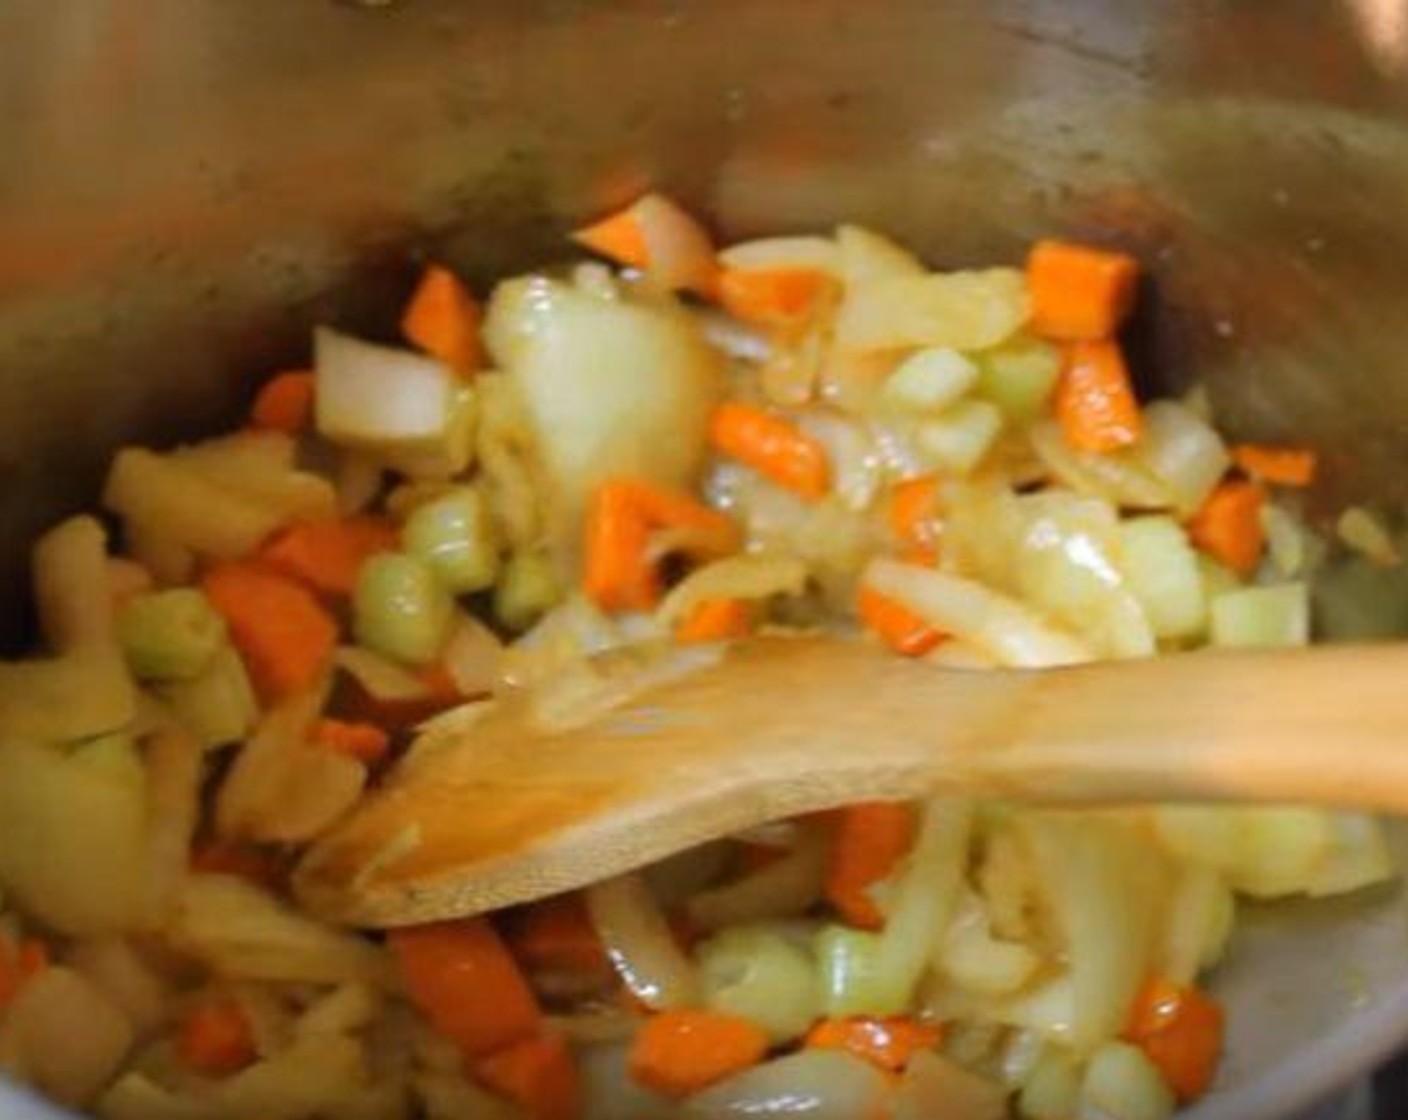 step 1 In a pot over medium-high heat, add Olive Oil (2 Tbsp) and the Onion (1). Saute until nice and translucent. Add the Garlic (to taste), Celery (2 stalks), and Carrots (2). Mix and cook for 5-7 minutes or until the veggies are nice and soft.